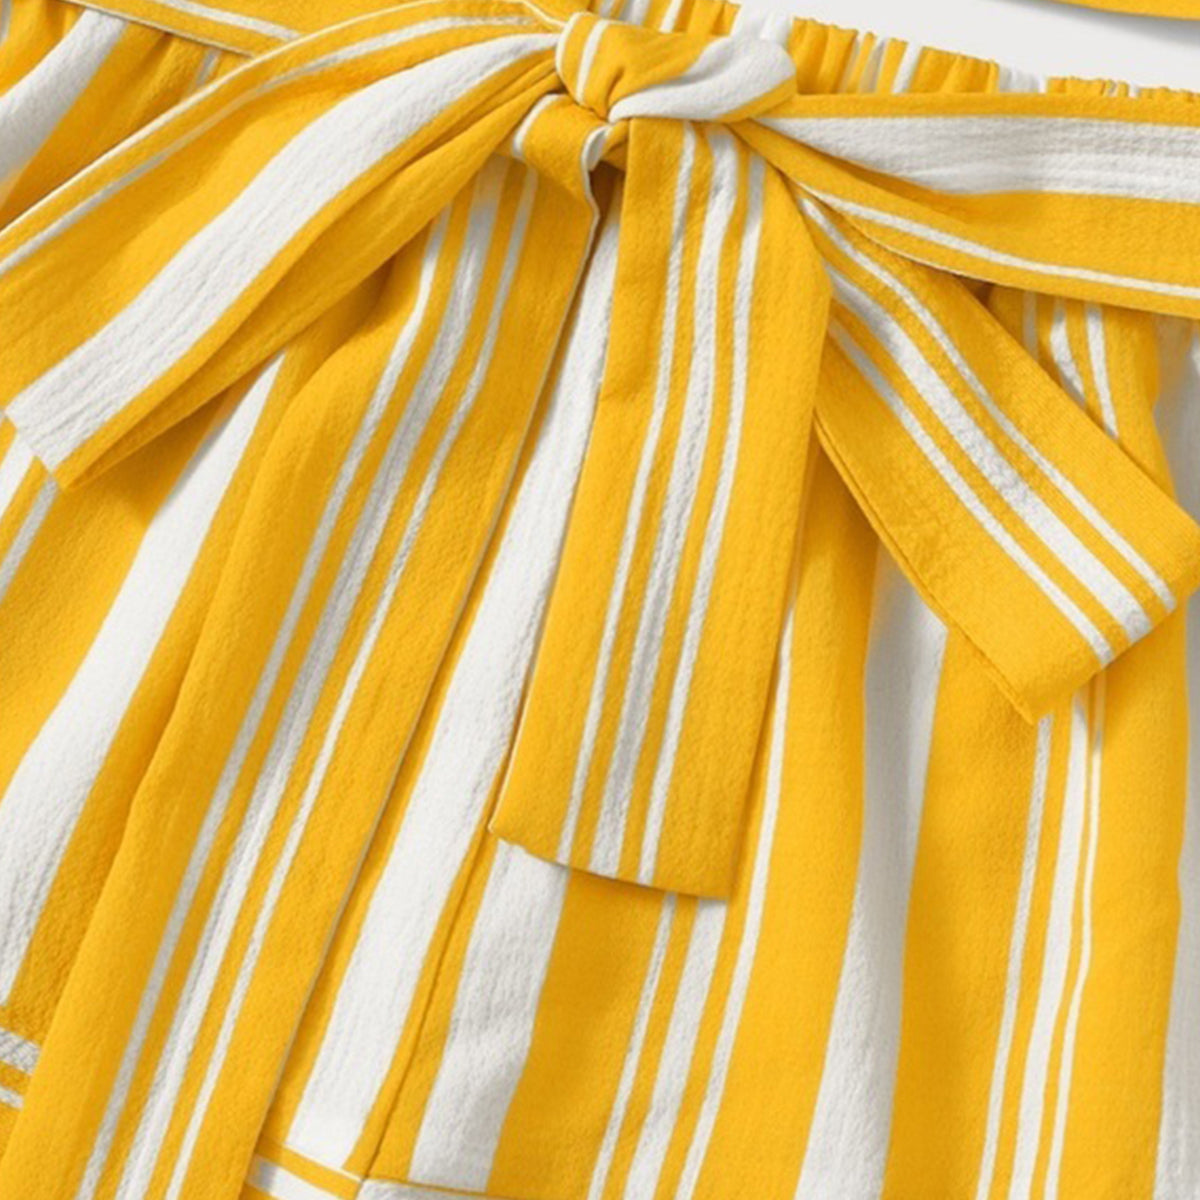 Unique Stylish Yellow Lining Strip Set & Cherry Designer Dresses_Frocks Combo for Baby Girls.